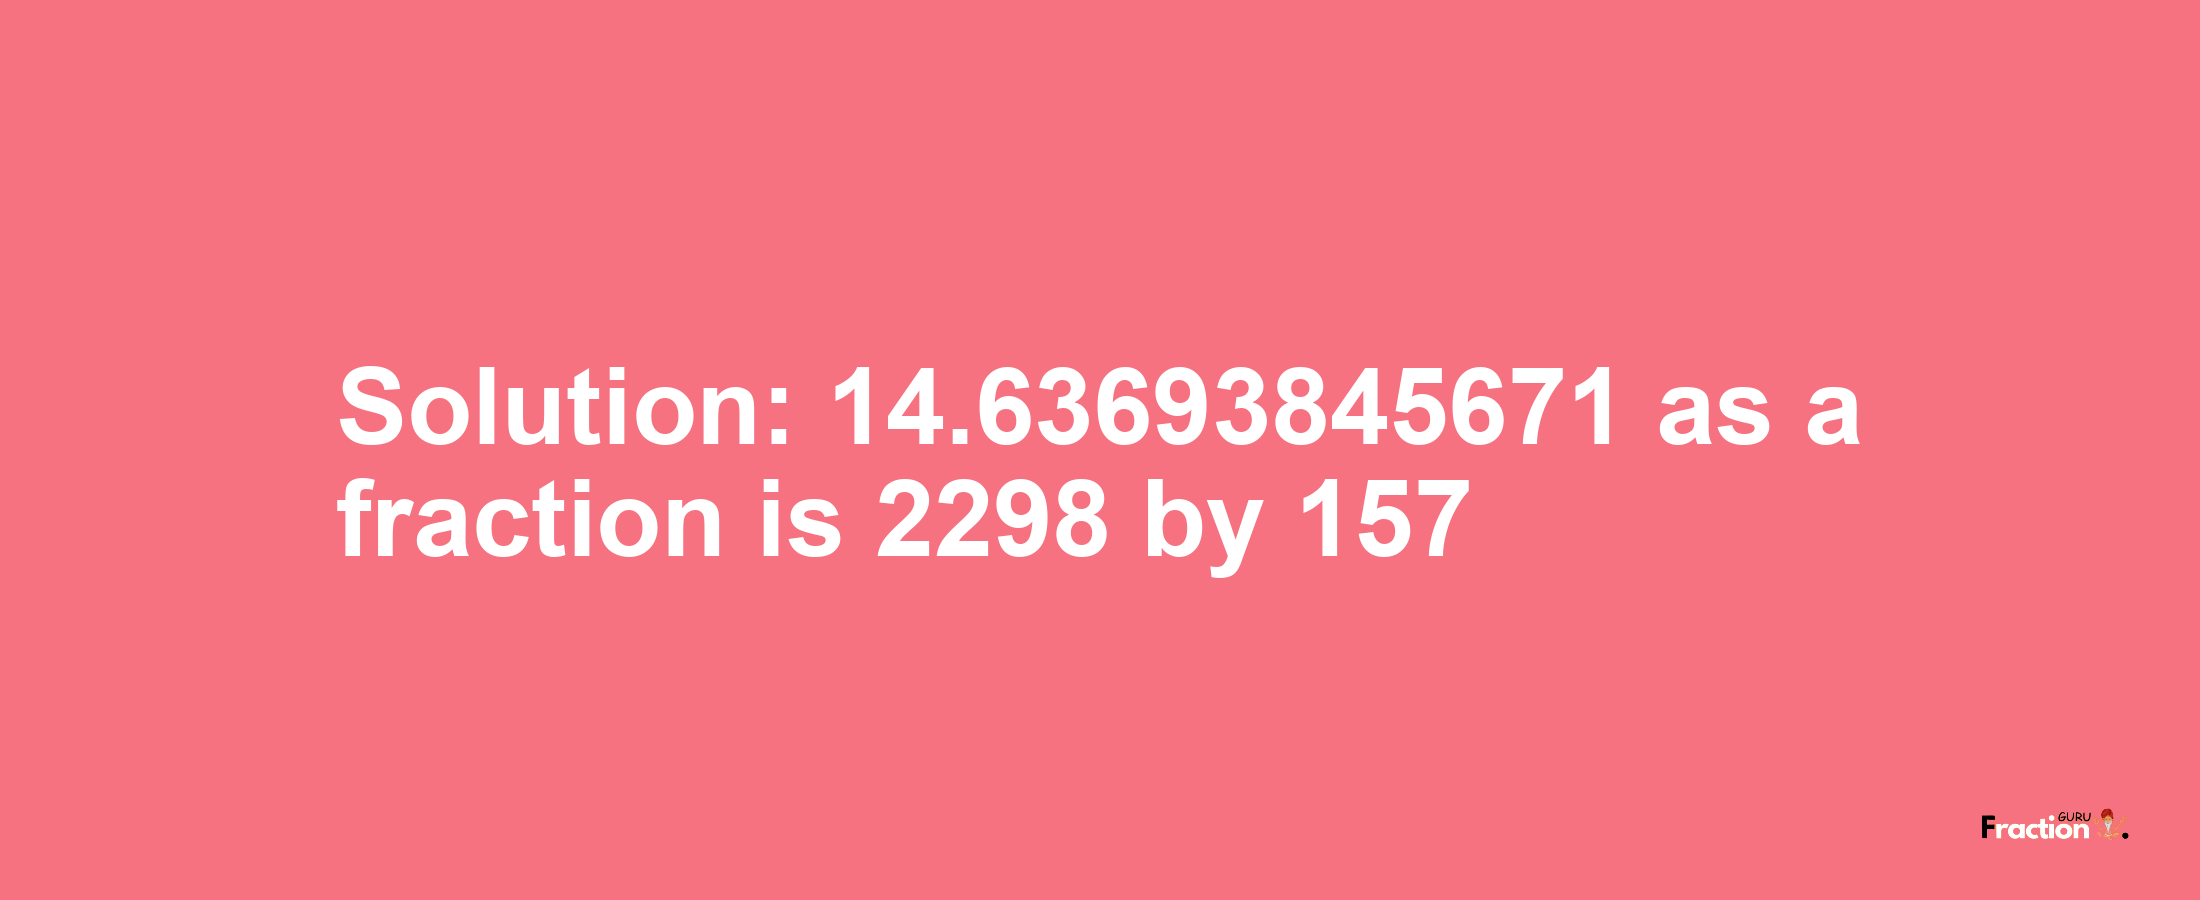 Solution:14.63693845671 as a fraction is 2298/157